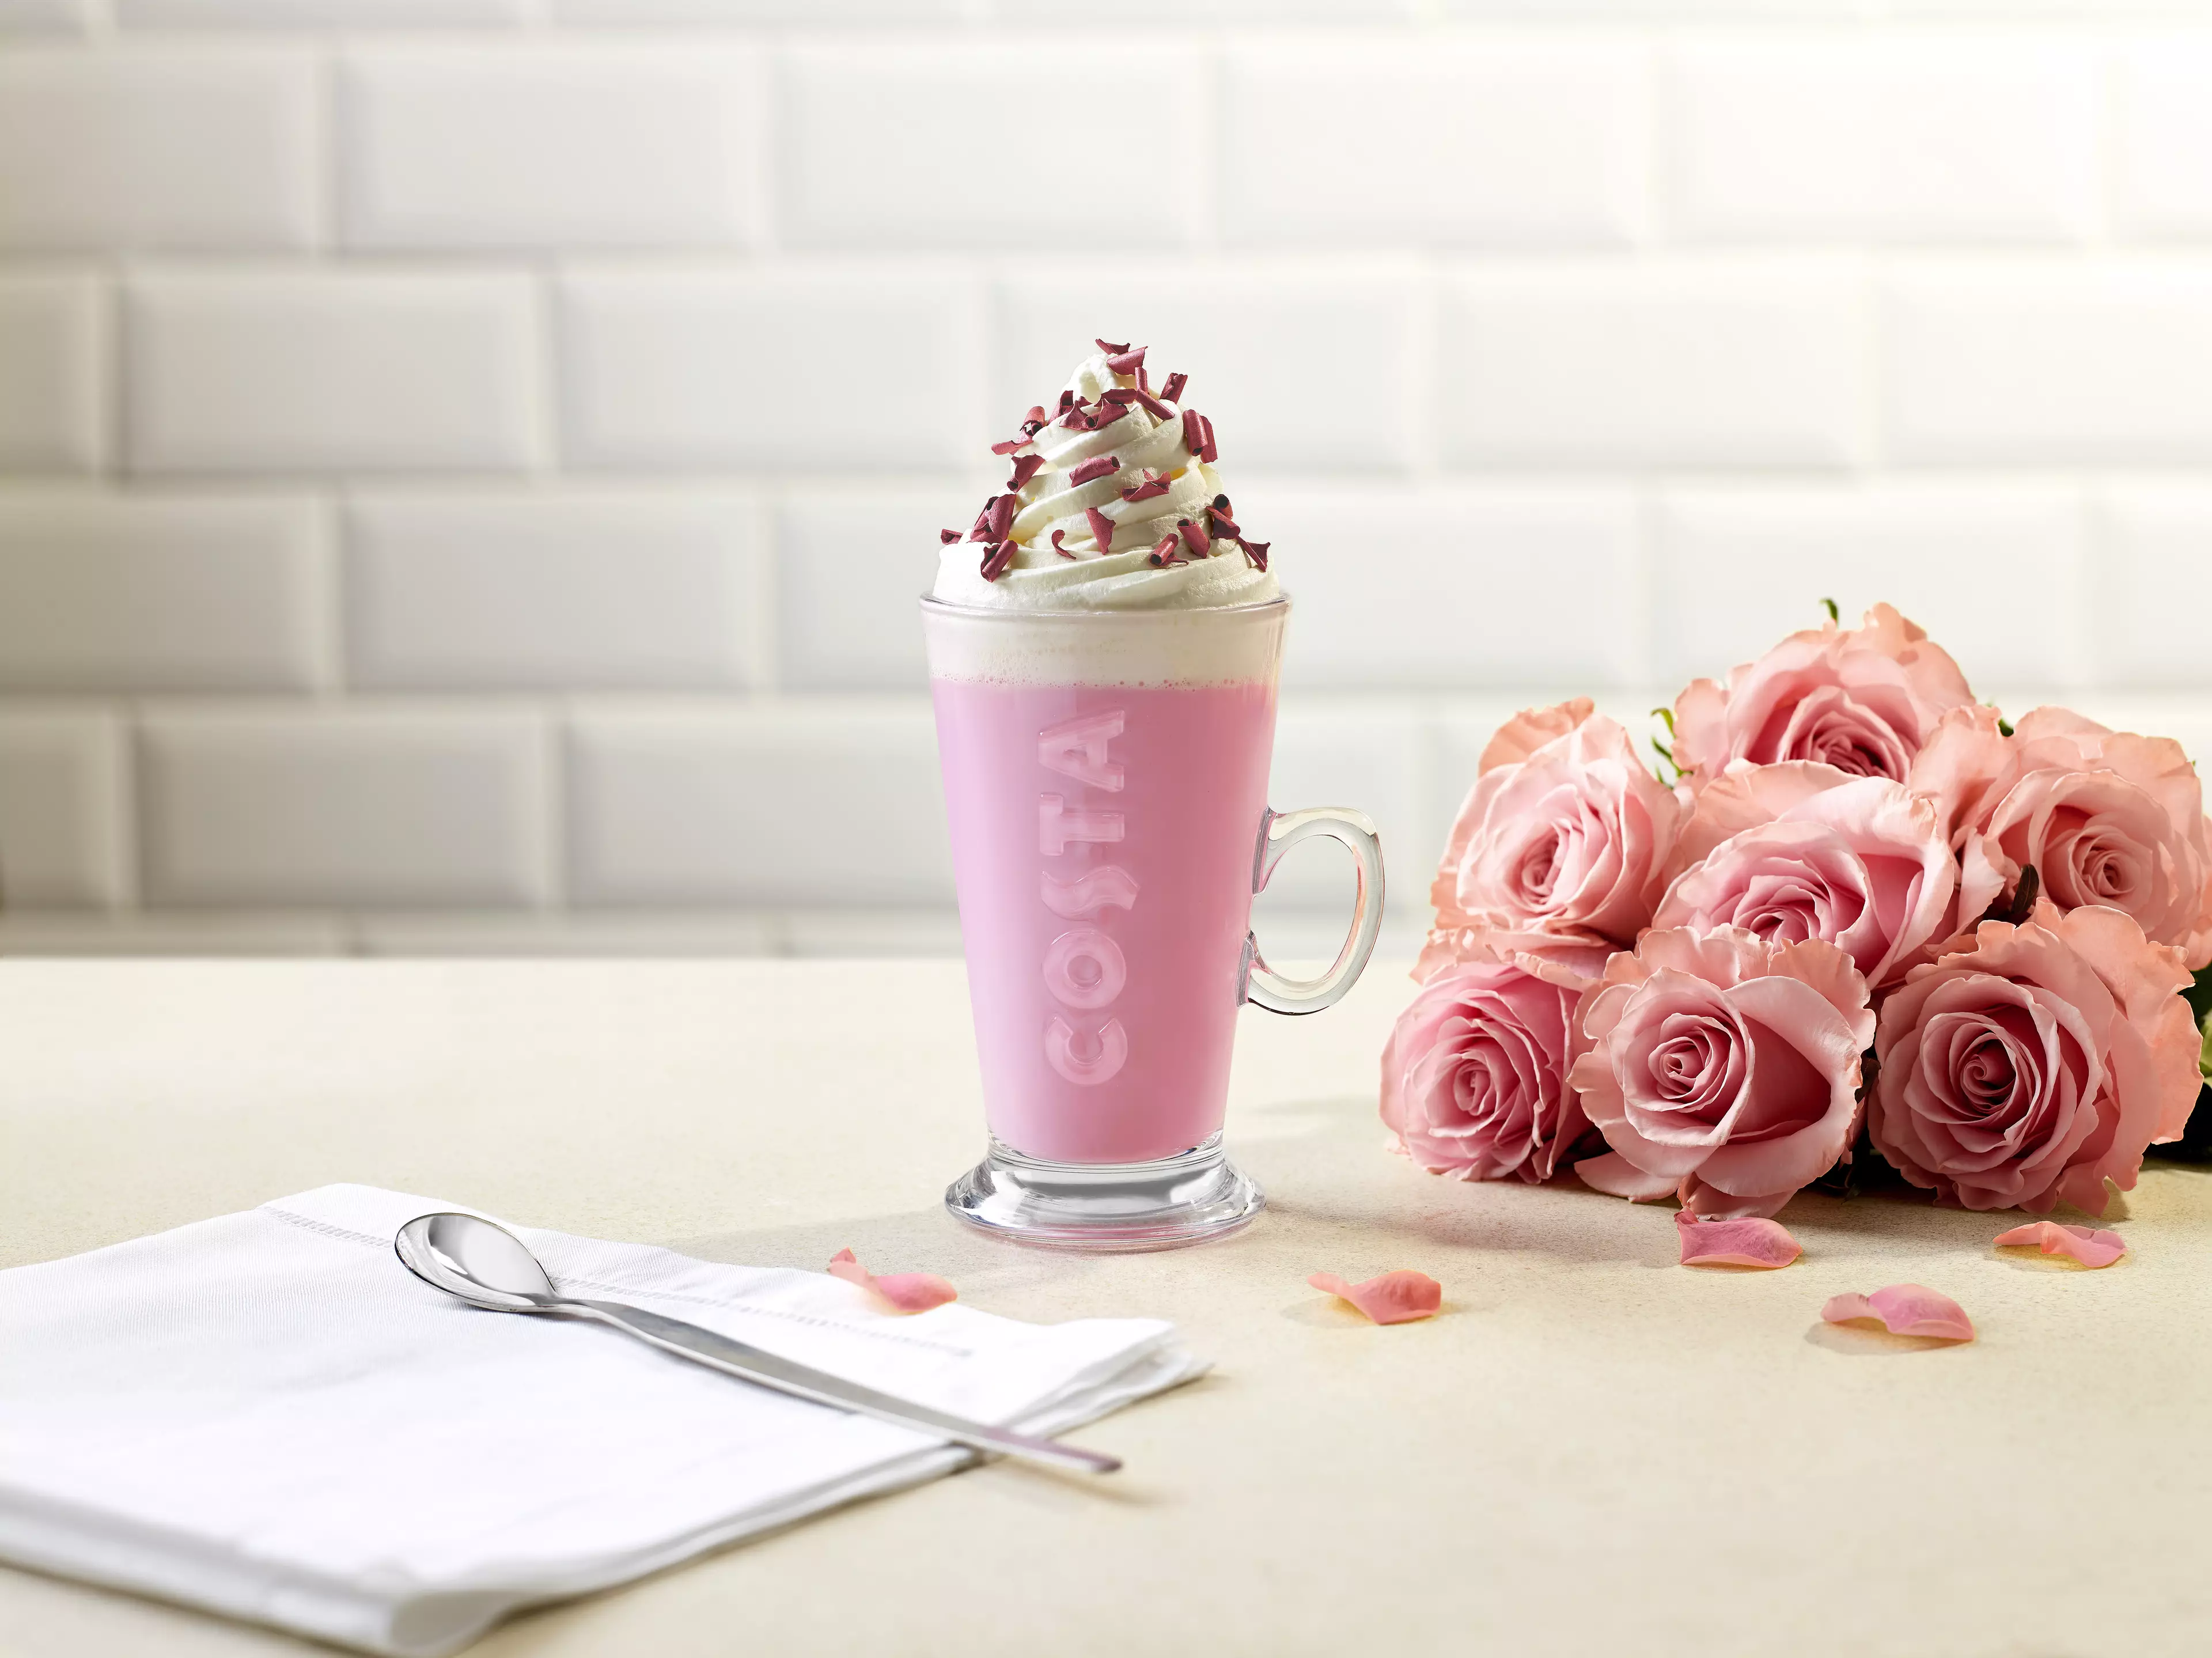 The Ruby Hot Chocolate is a pretty pink dream (